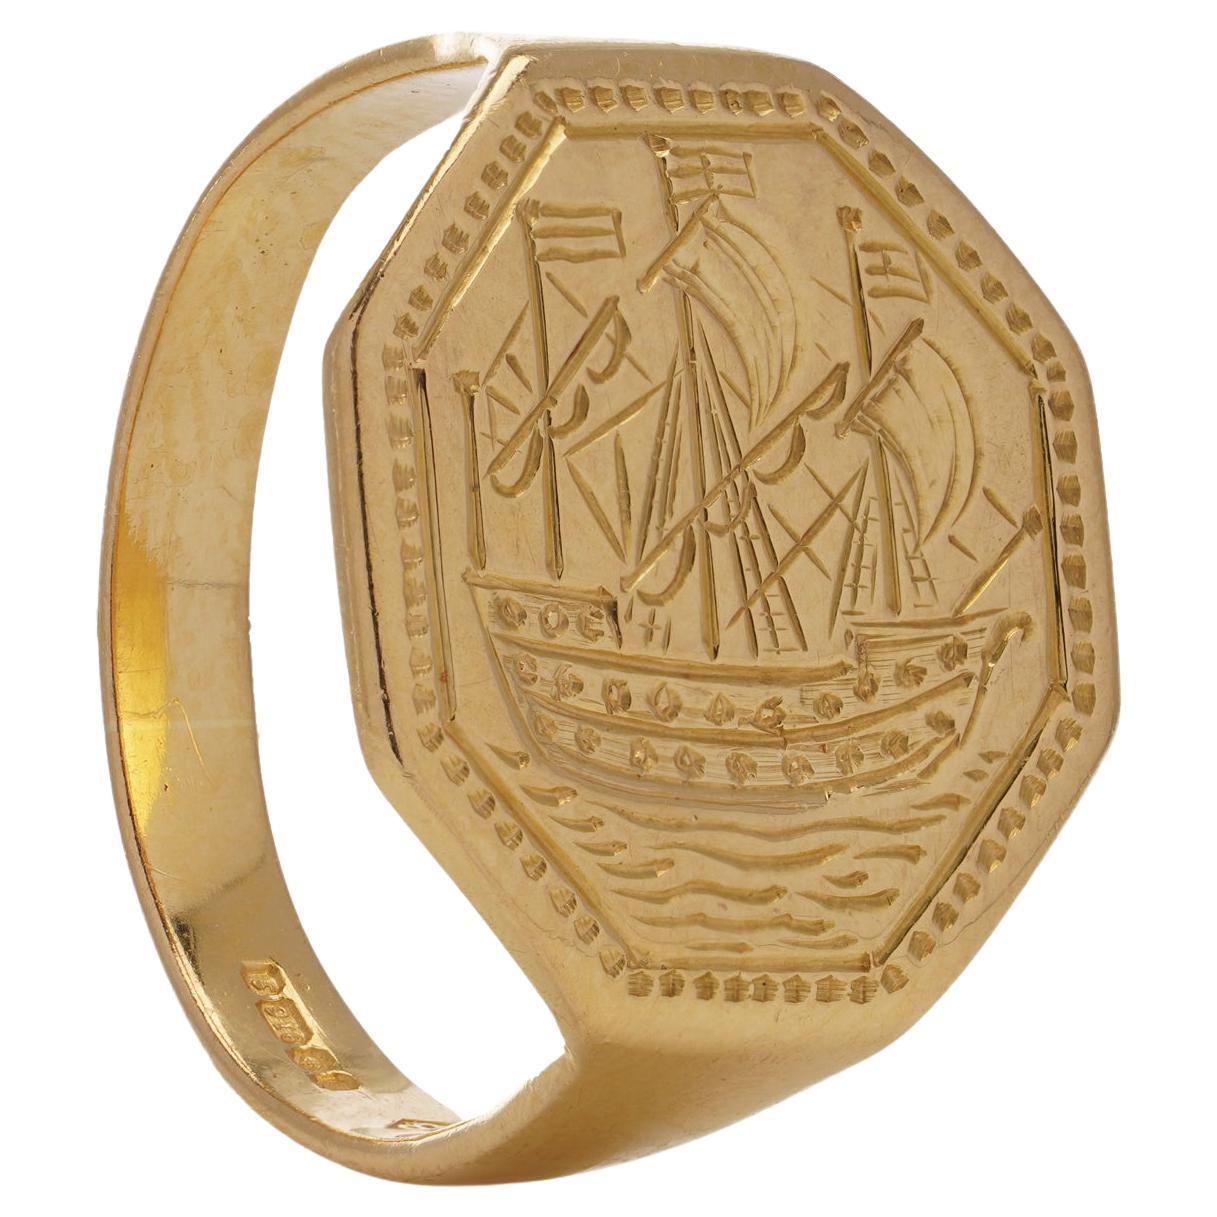 Vintage 22kt. yellow gold signet ring featuring the man-of-war ship For Sale